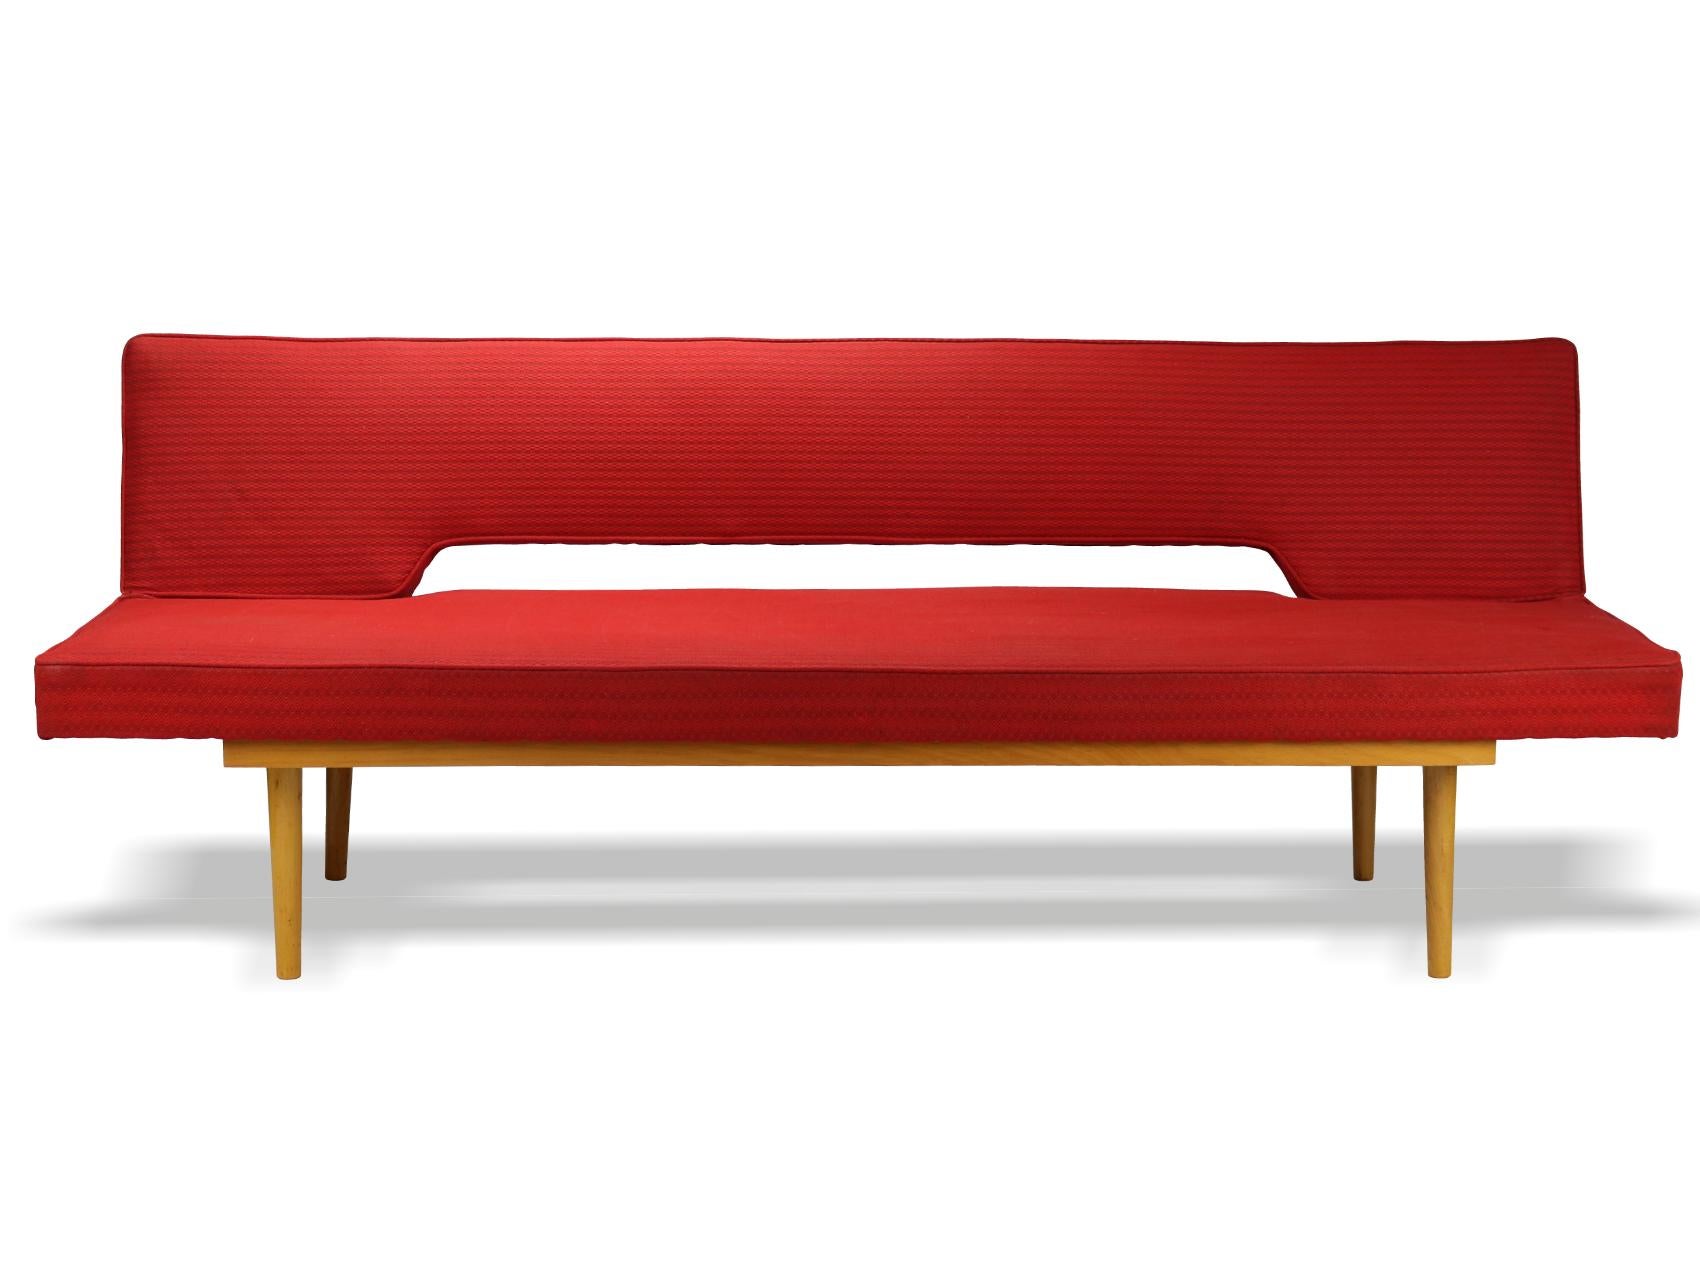 This sofa was designed by Miroslav Navratil in the 1960s fo Interier Praha Czechoslovakia. It features a beech frame with the original red fabric. It is easily folded out into a 90 cm wide bed,.